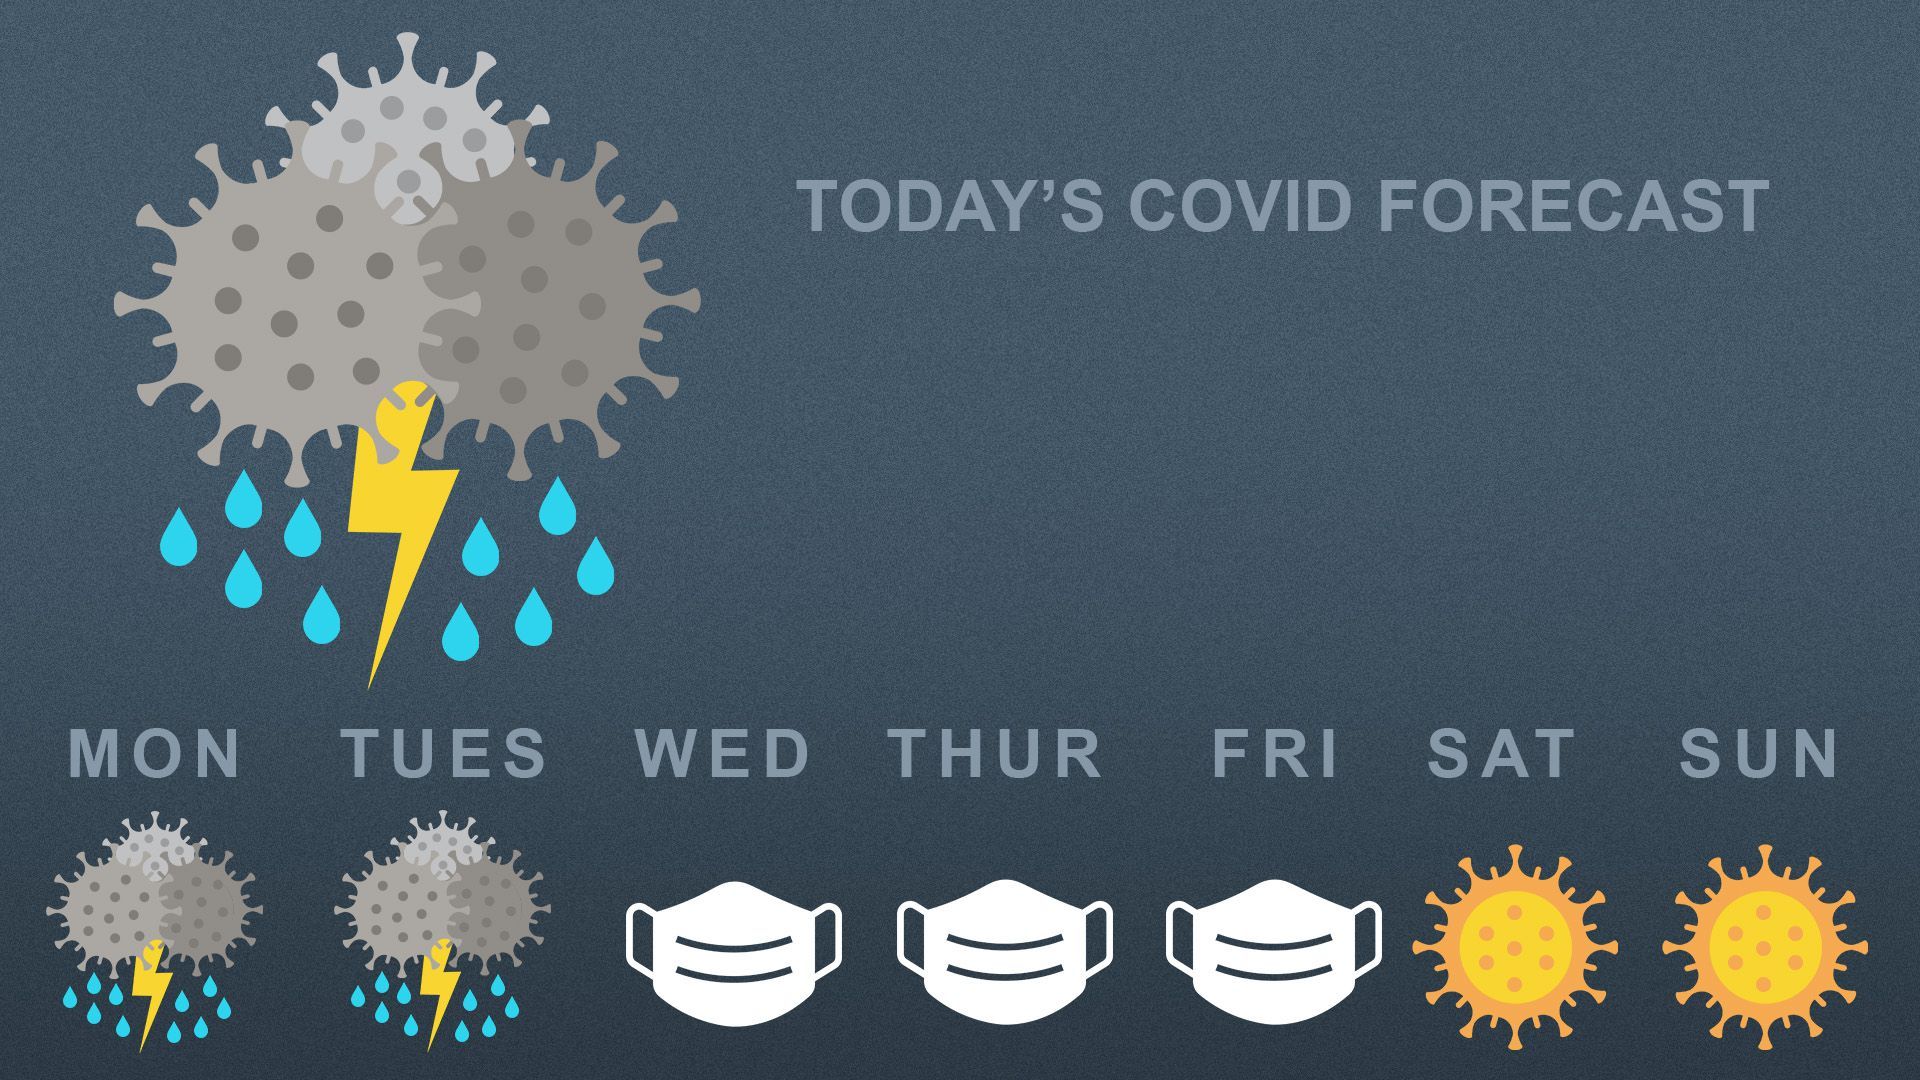 Illustration of a weather forecast with COVID predictions. 